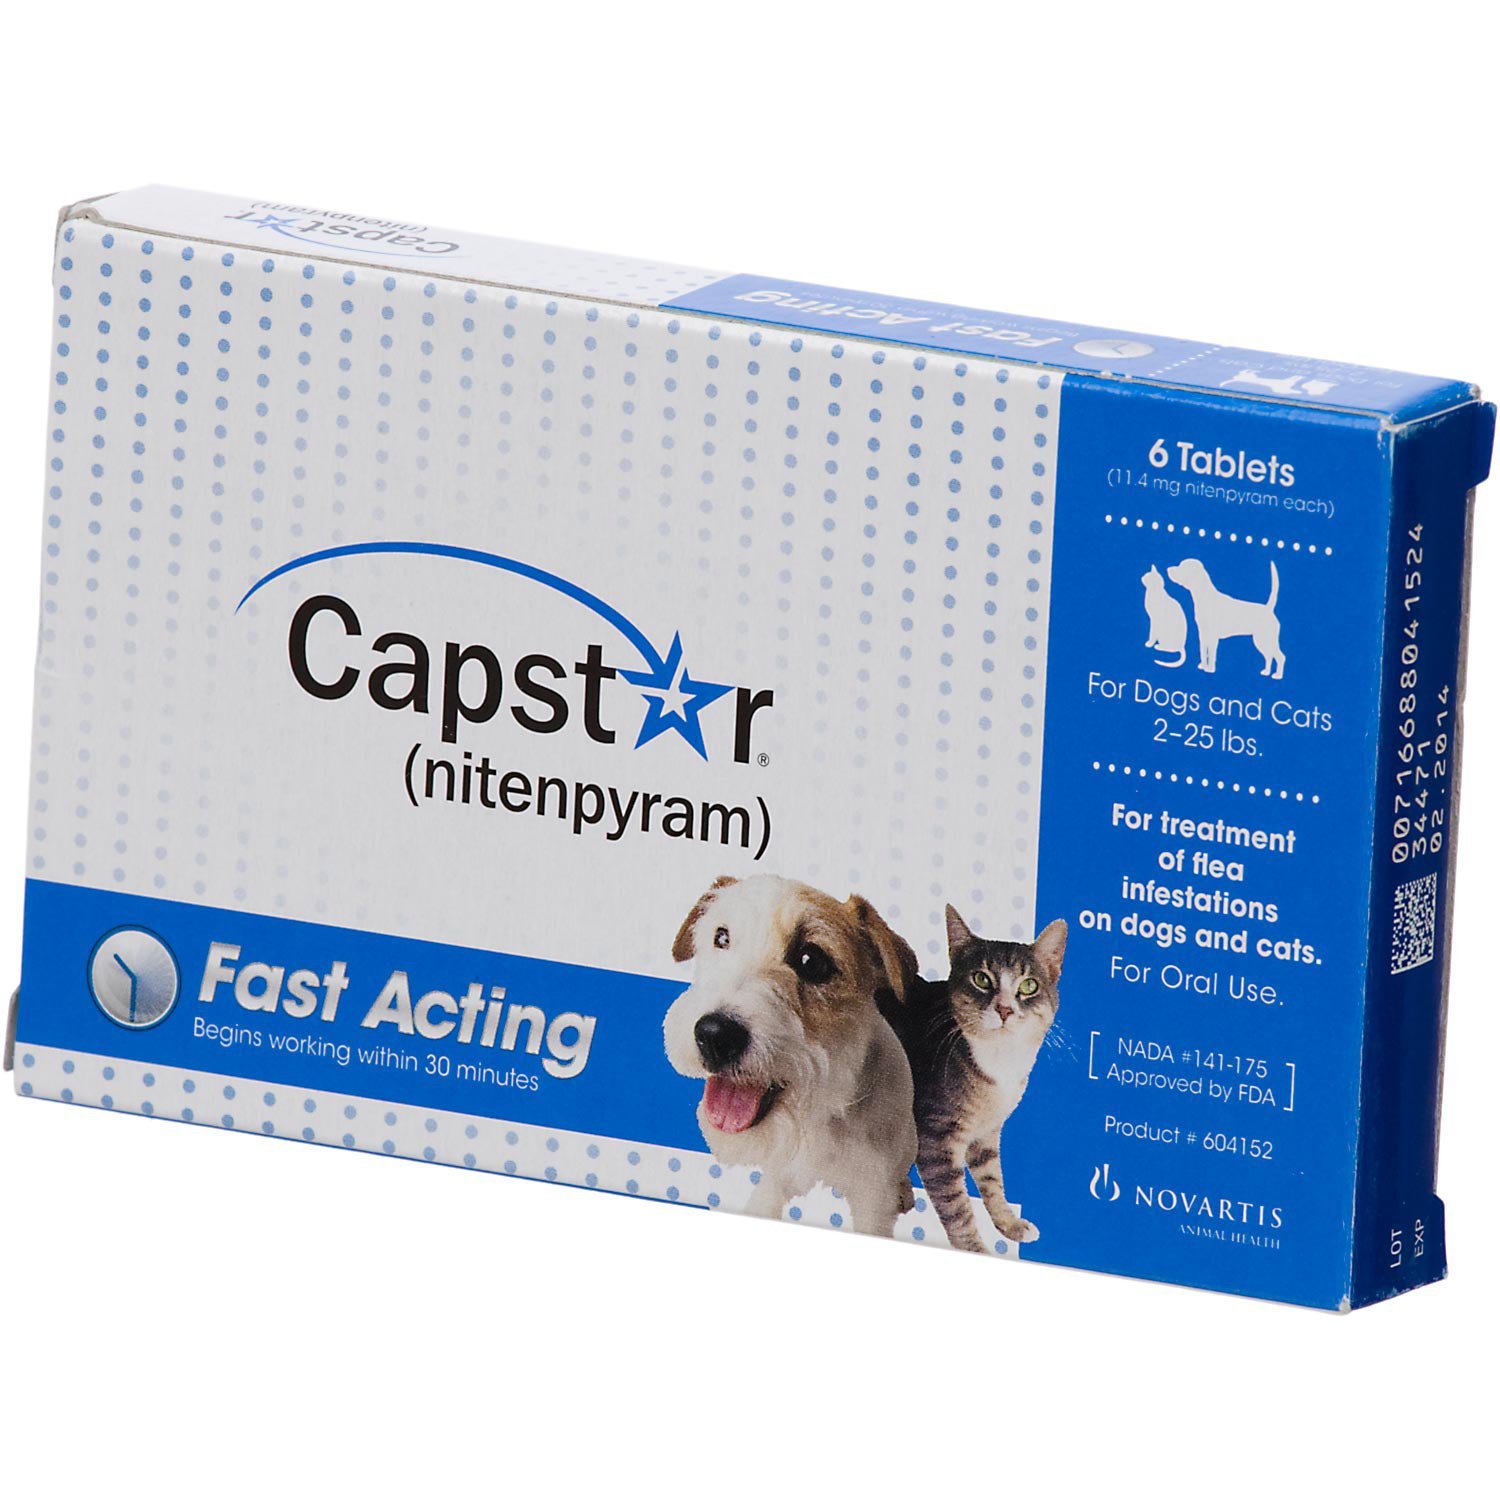 Capstar Flea Tablets for Dogs and Cats, 2